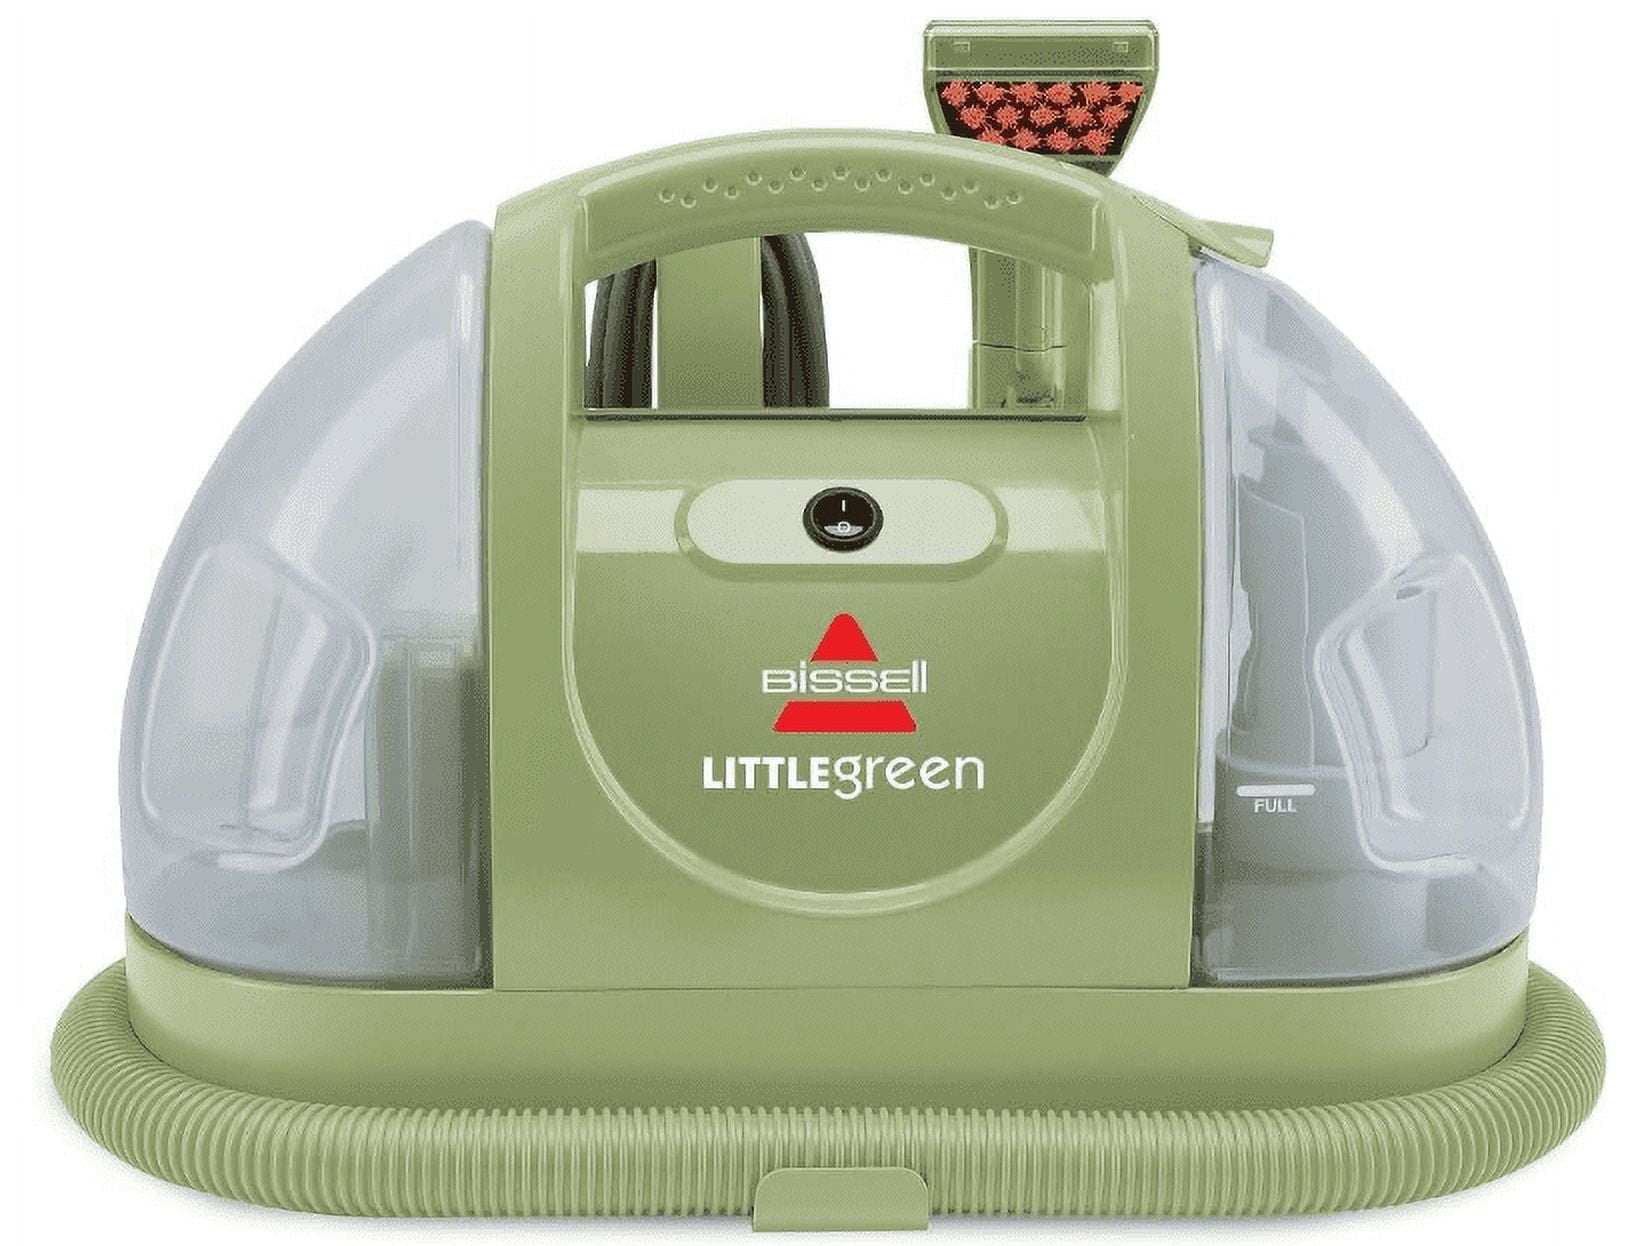 Bissell Little Green Multi-Purpose Portable Carpet and Upholstery